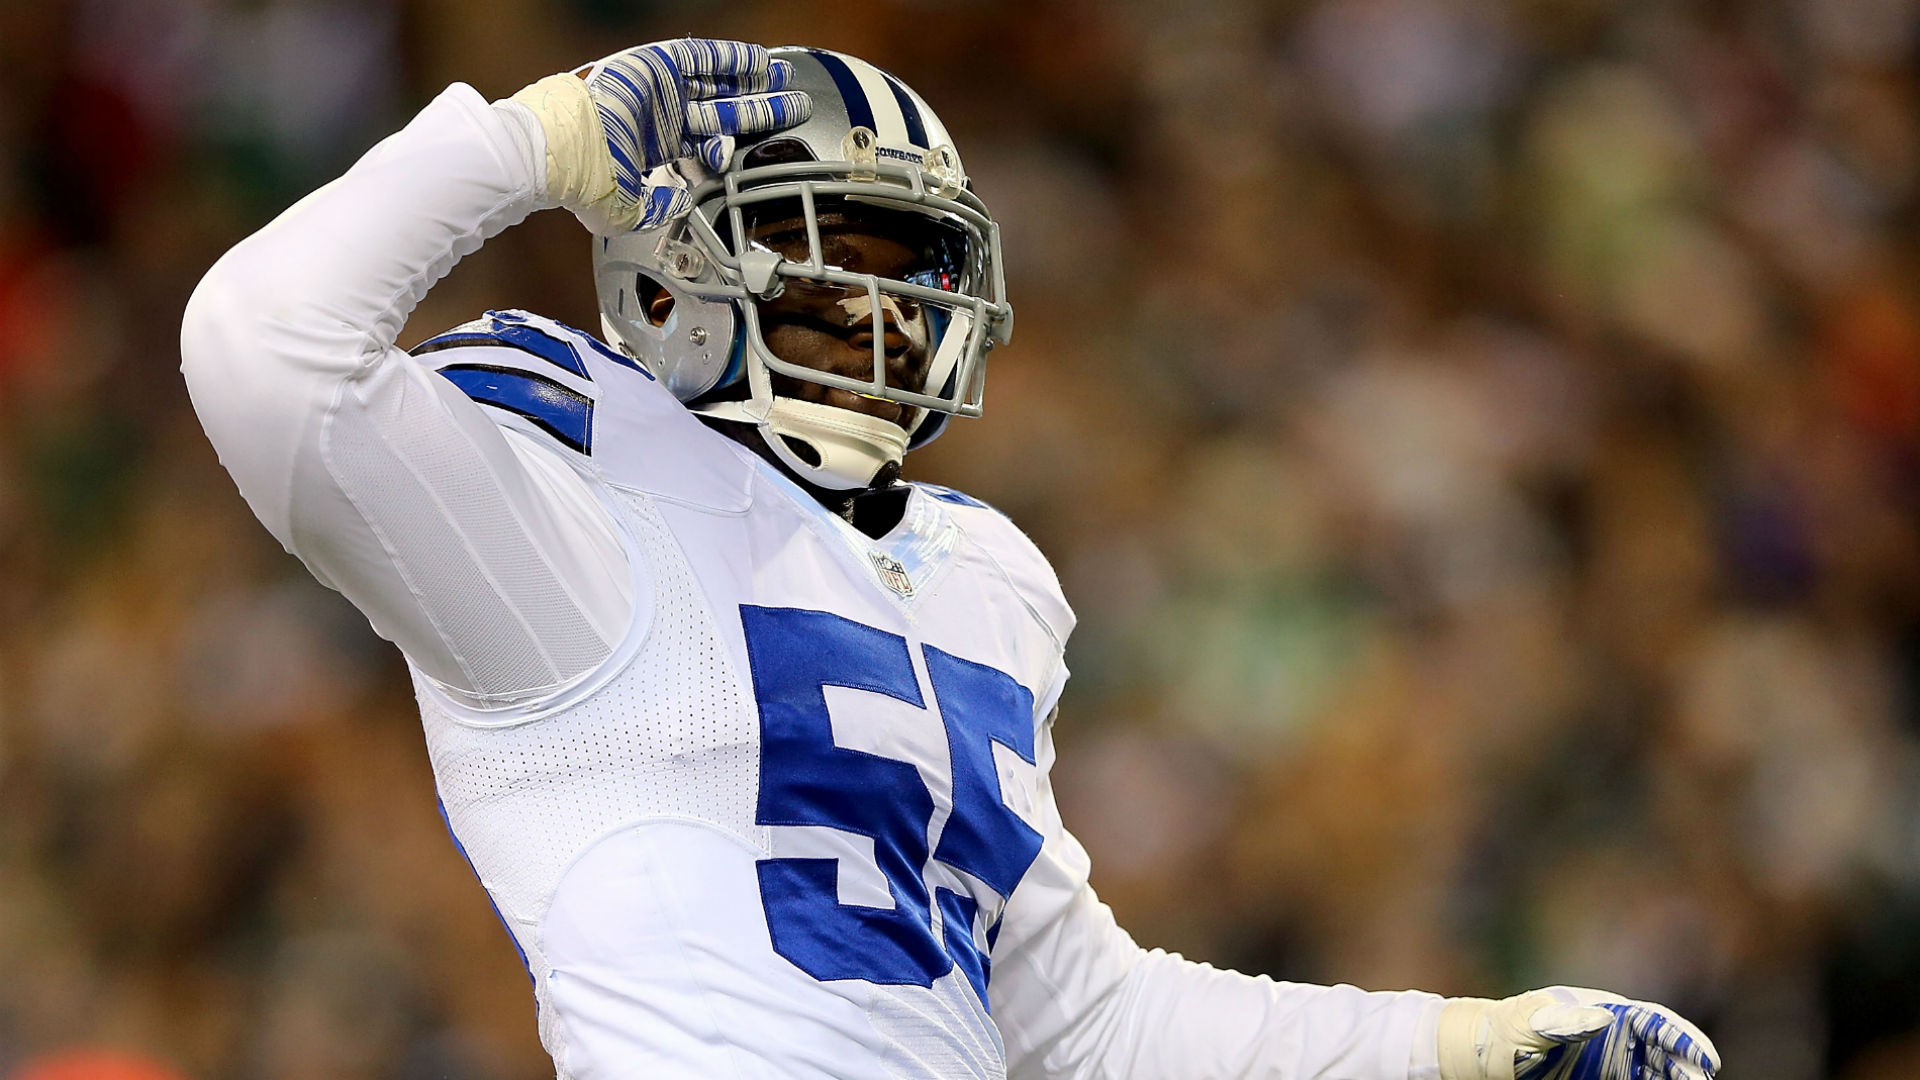 Rolando McClain conditionally reinstated by NFL after missing 3 seasons, report says